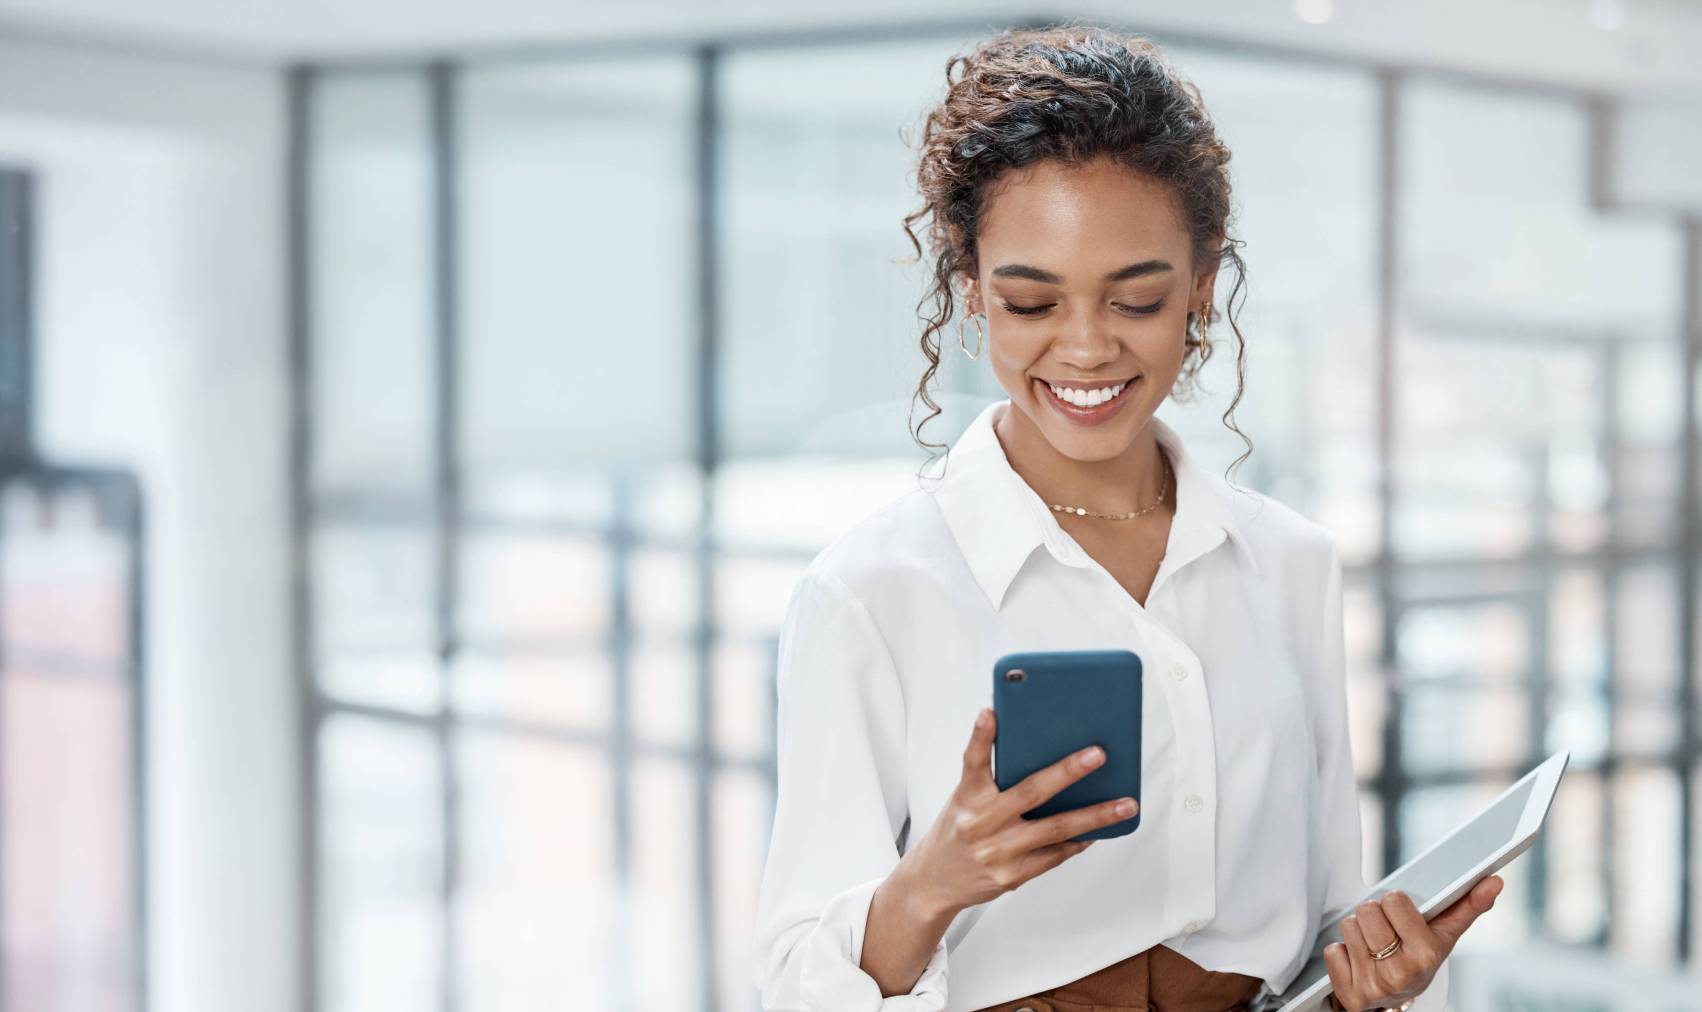 Business woman holding phone and tablet